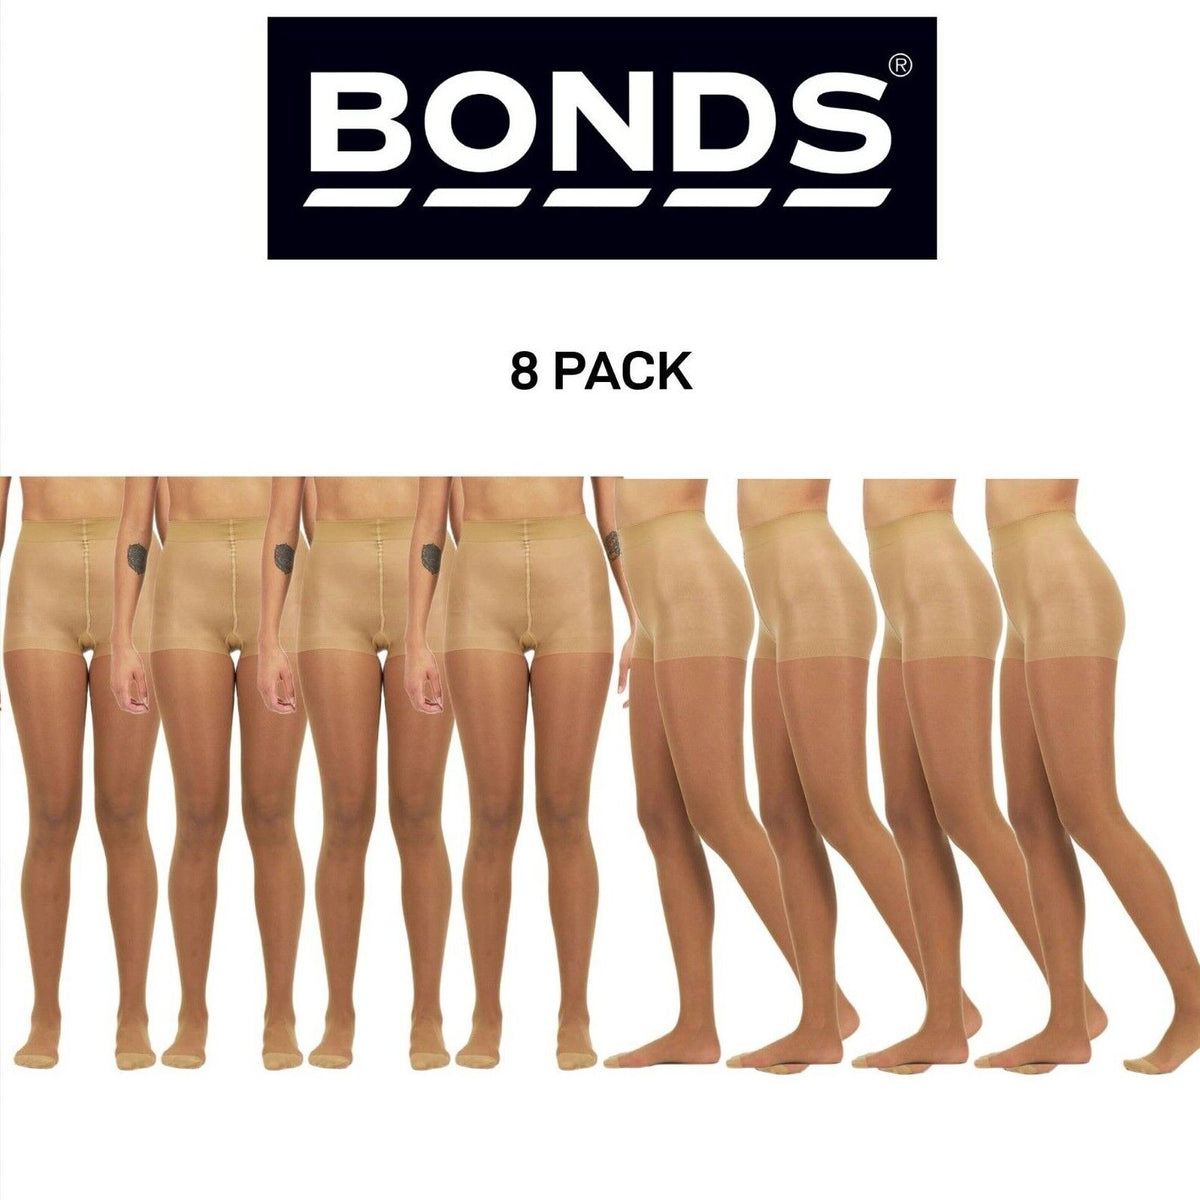 Bonds Womens Sheer Slimming Tights Comfortable Top Waistband 8 Pack L79570